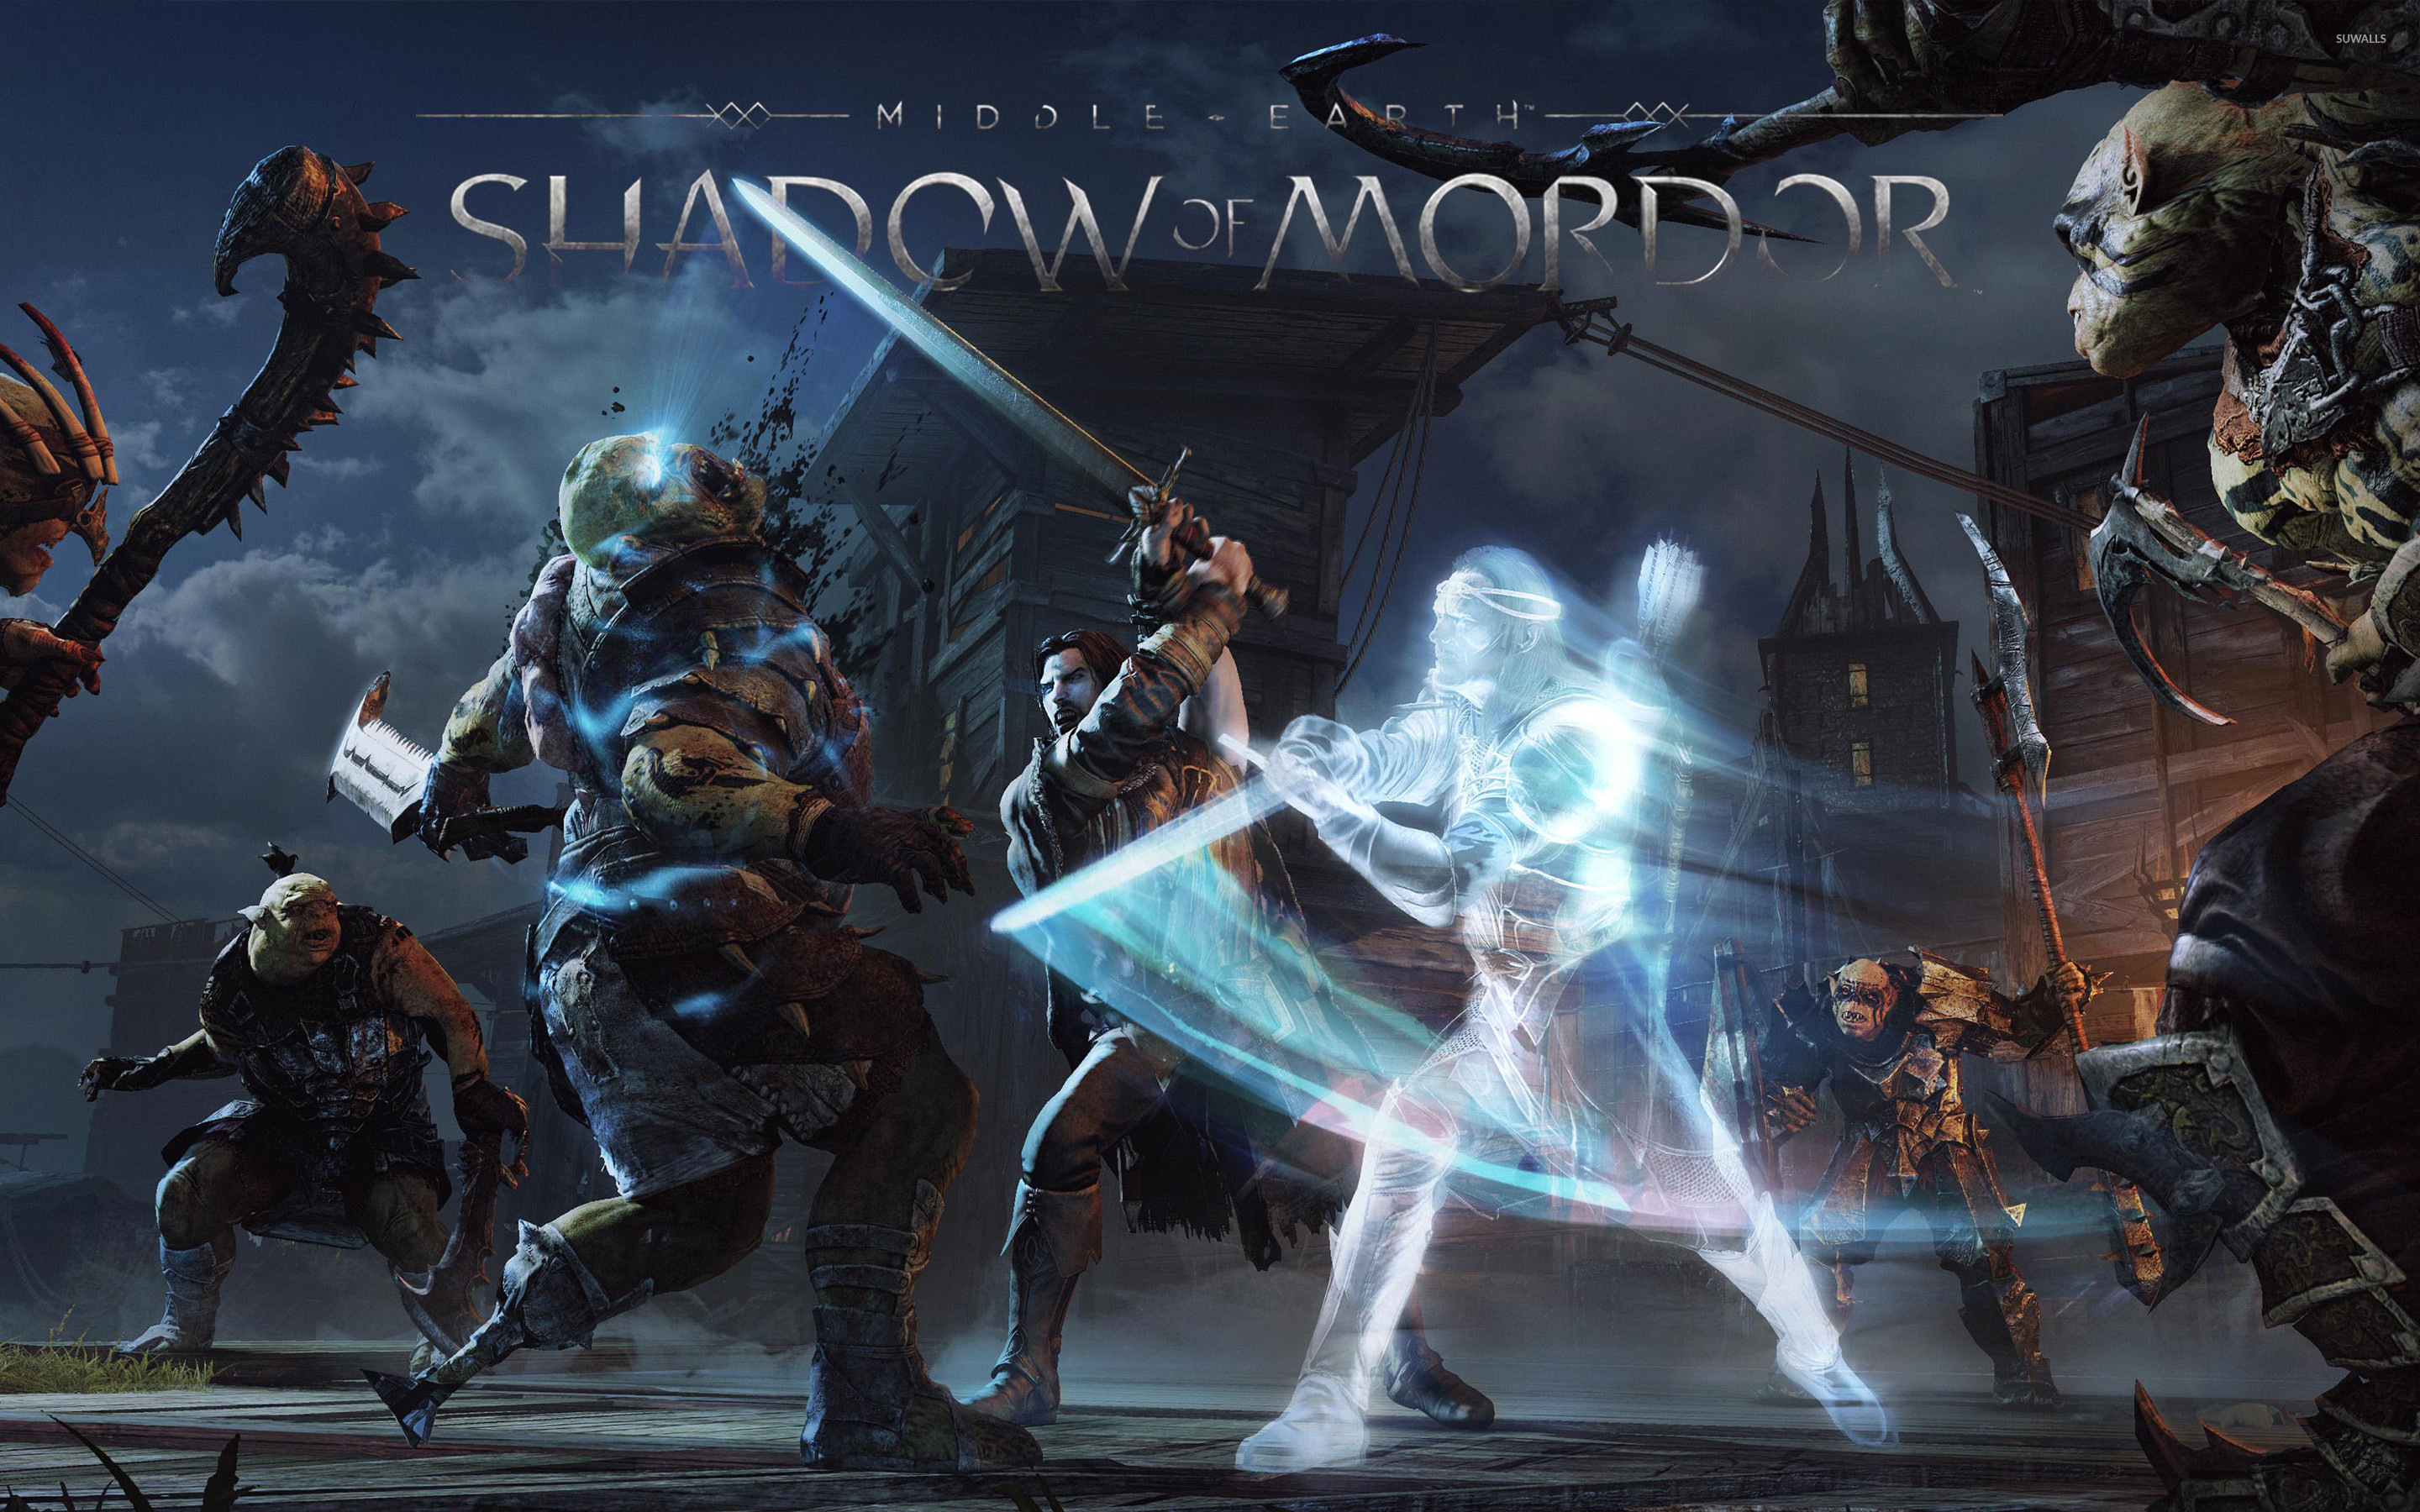 2880x1800 Middle-earth: Shadow of Mordor [4] wallpaper